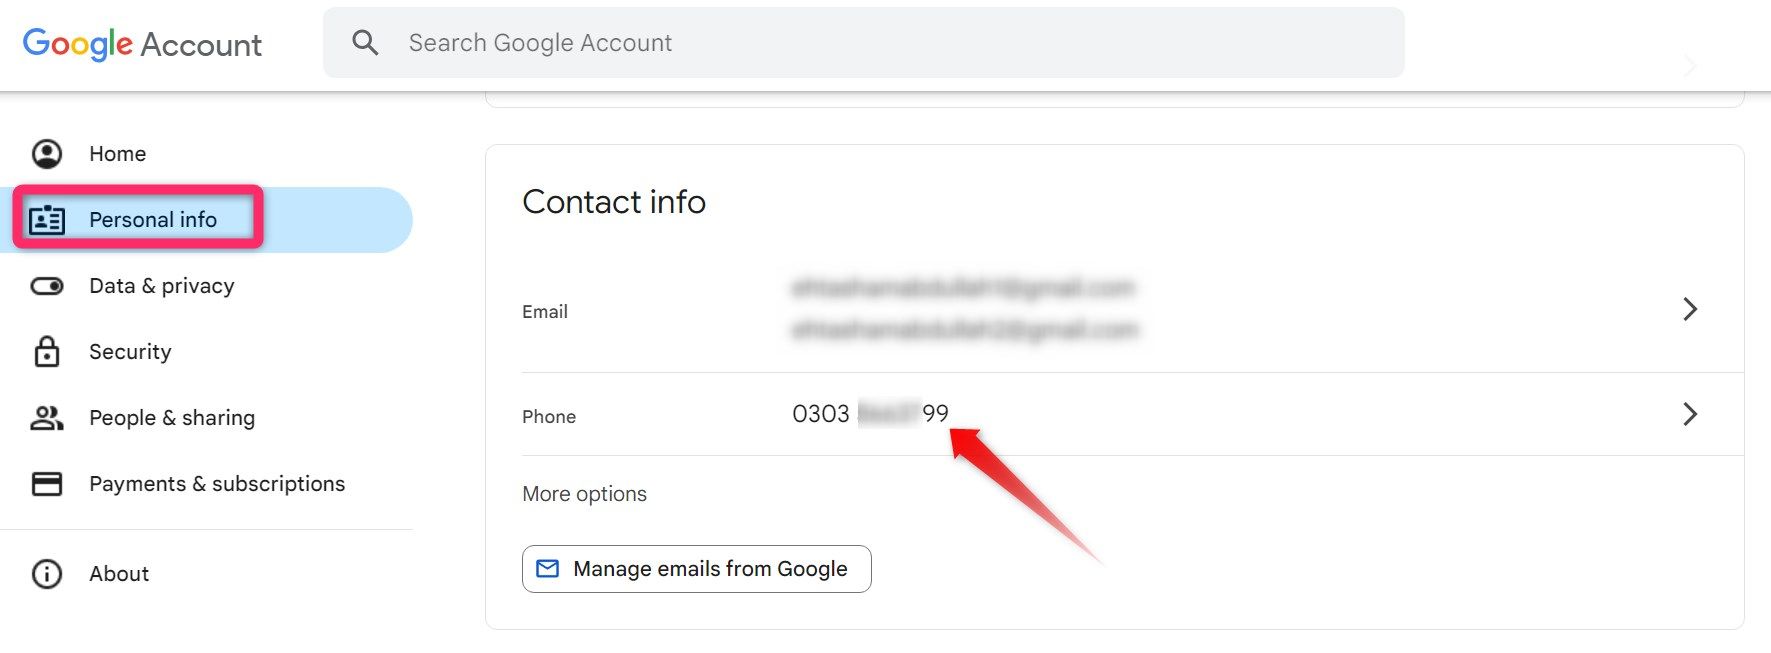 Opening the phone number to modify it in Google account settings